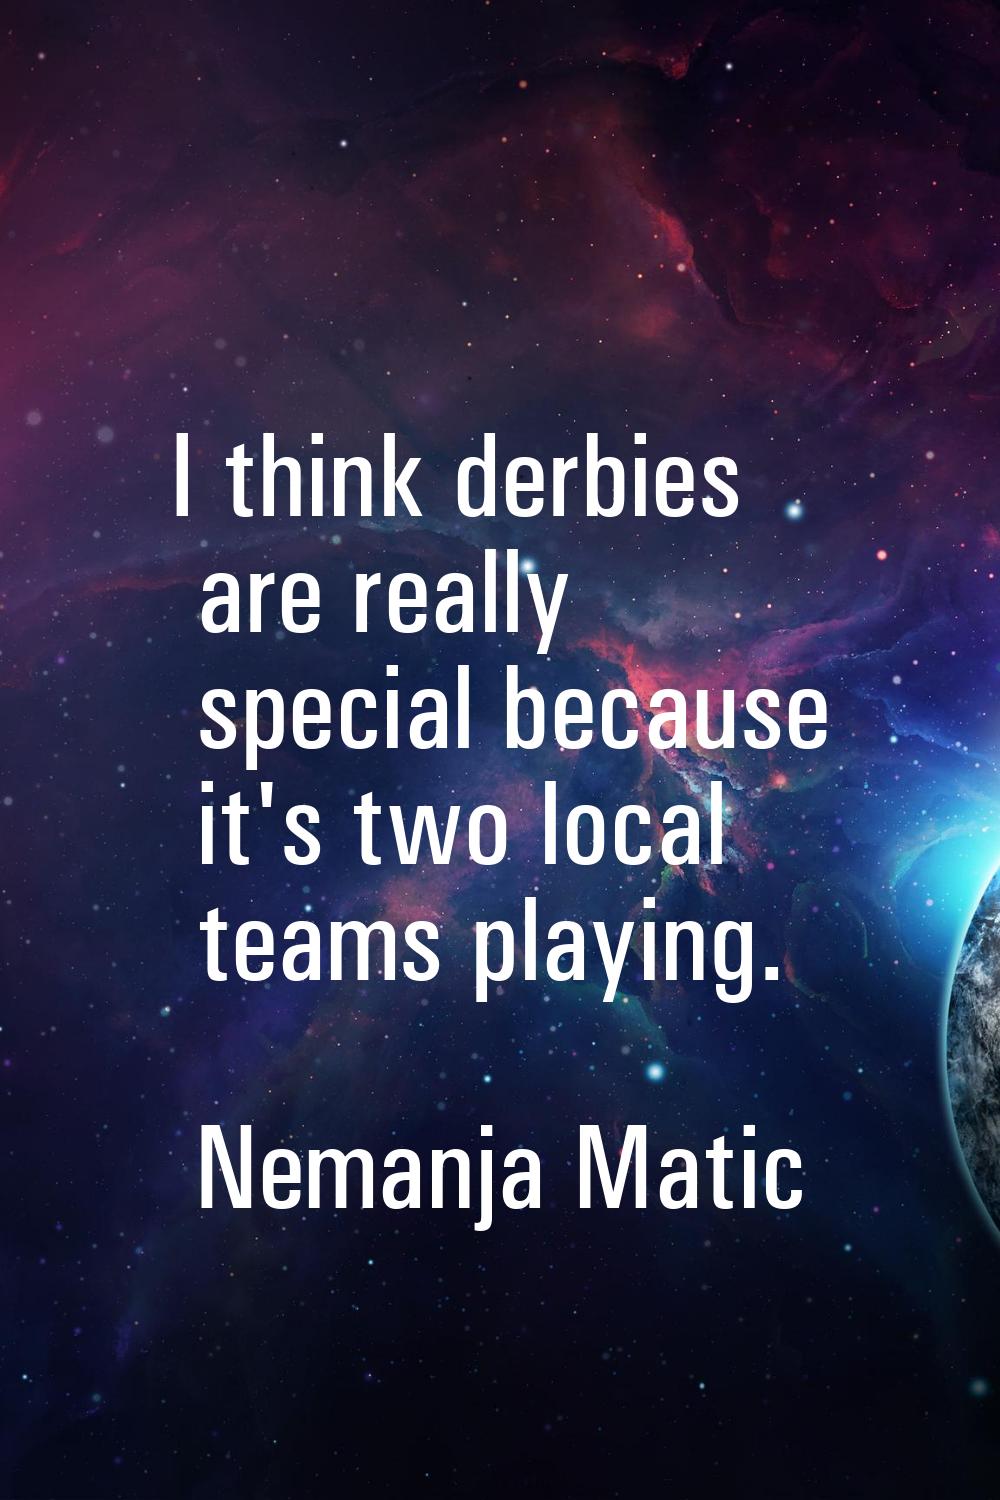 I think derbies are really special because it's two local teams playing.